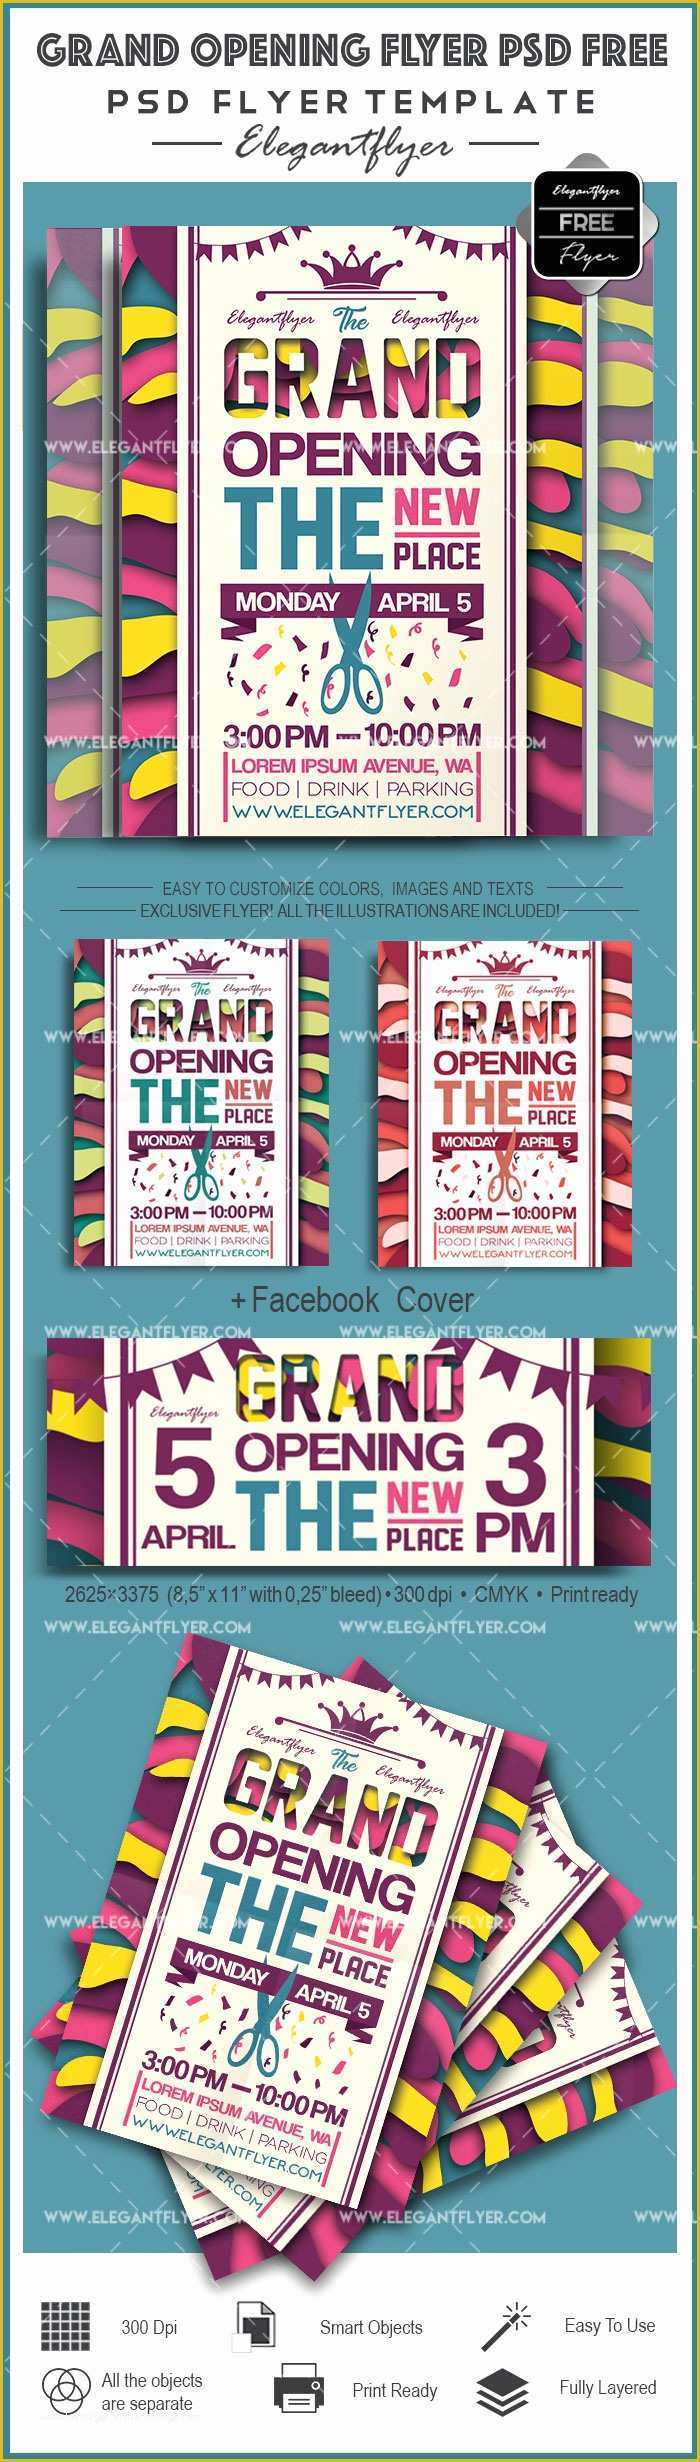 Grand Opening Flyer Template Free Of Grand Opening Flyer Psd Template – by Elegantflyer